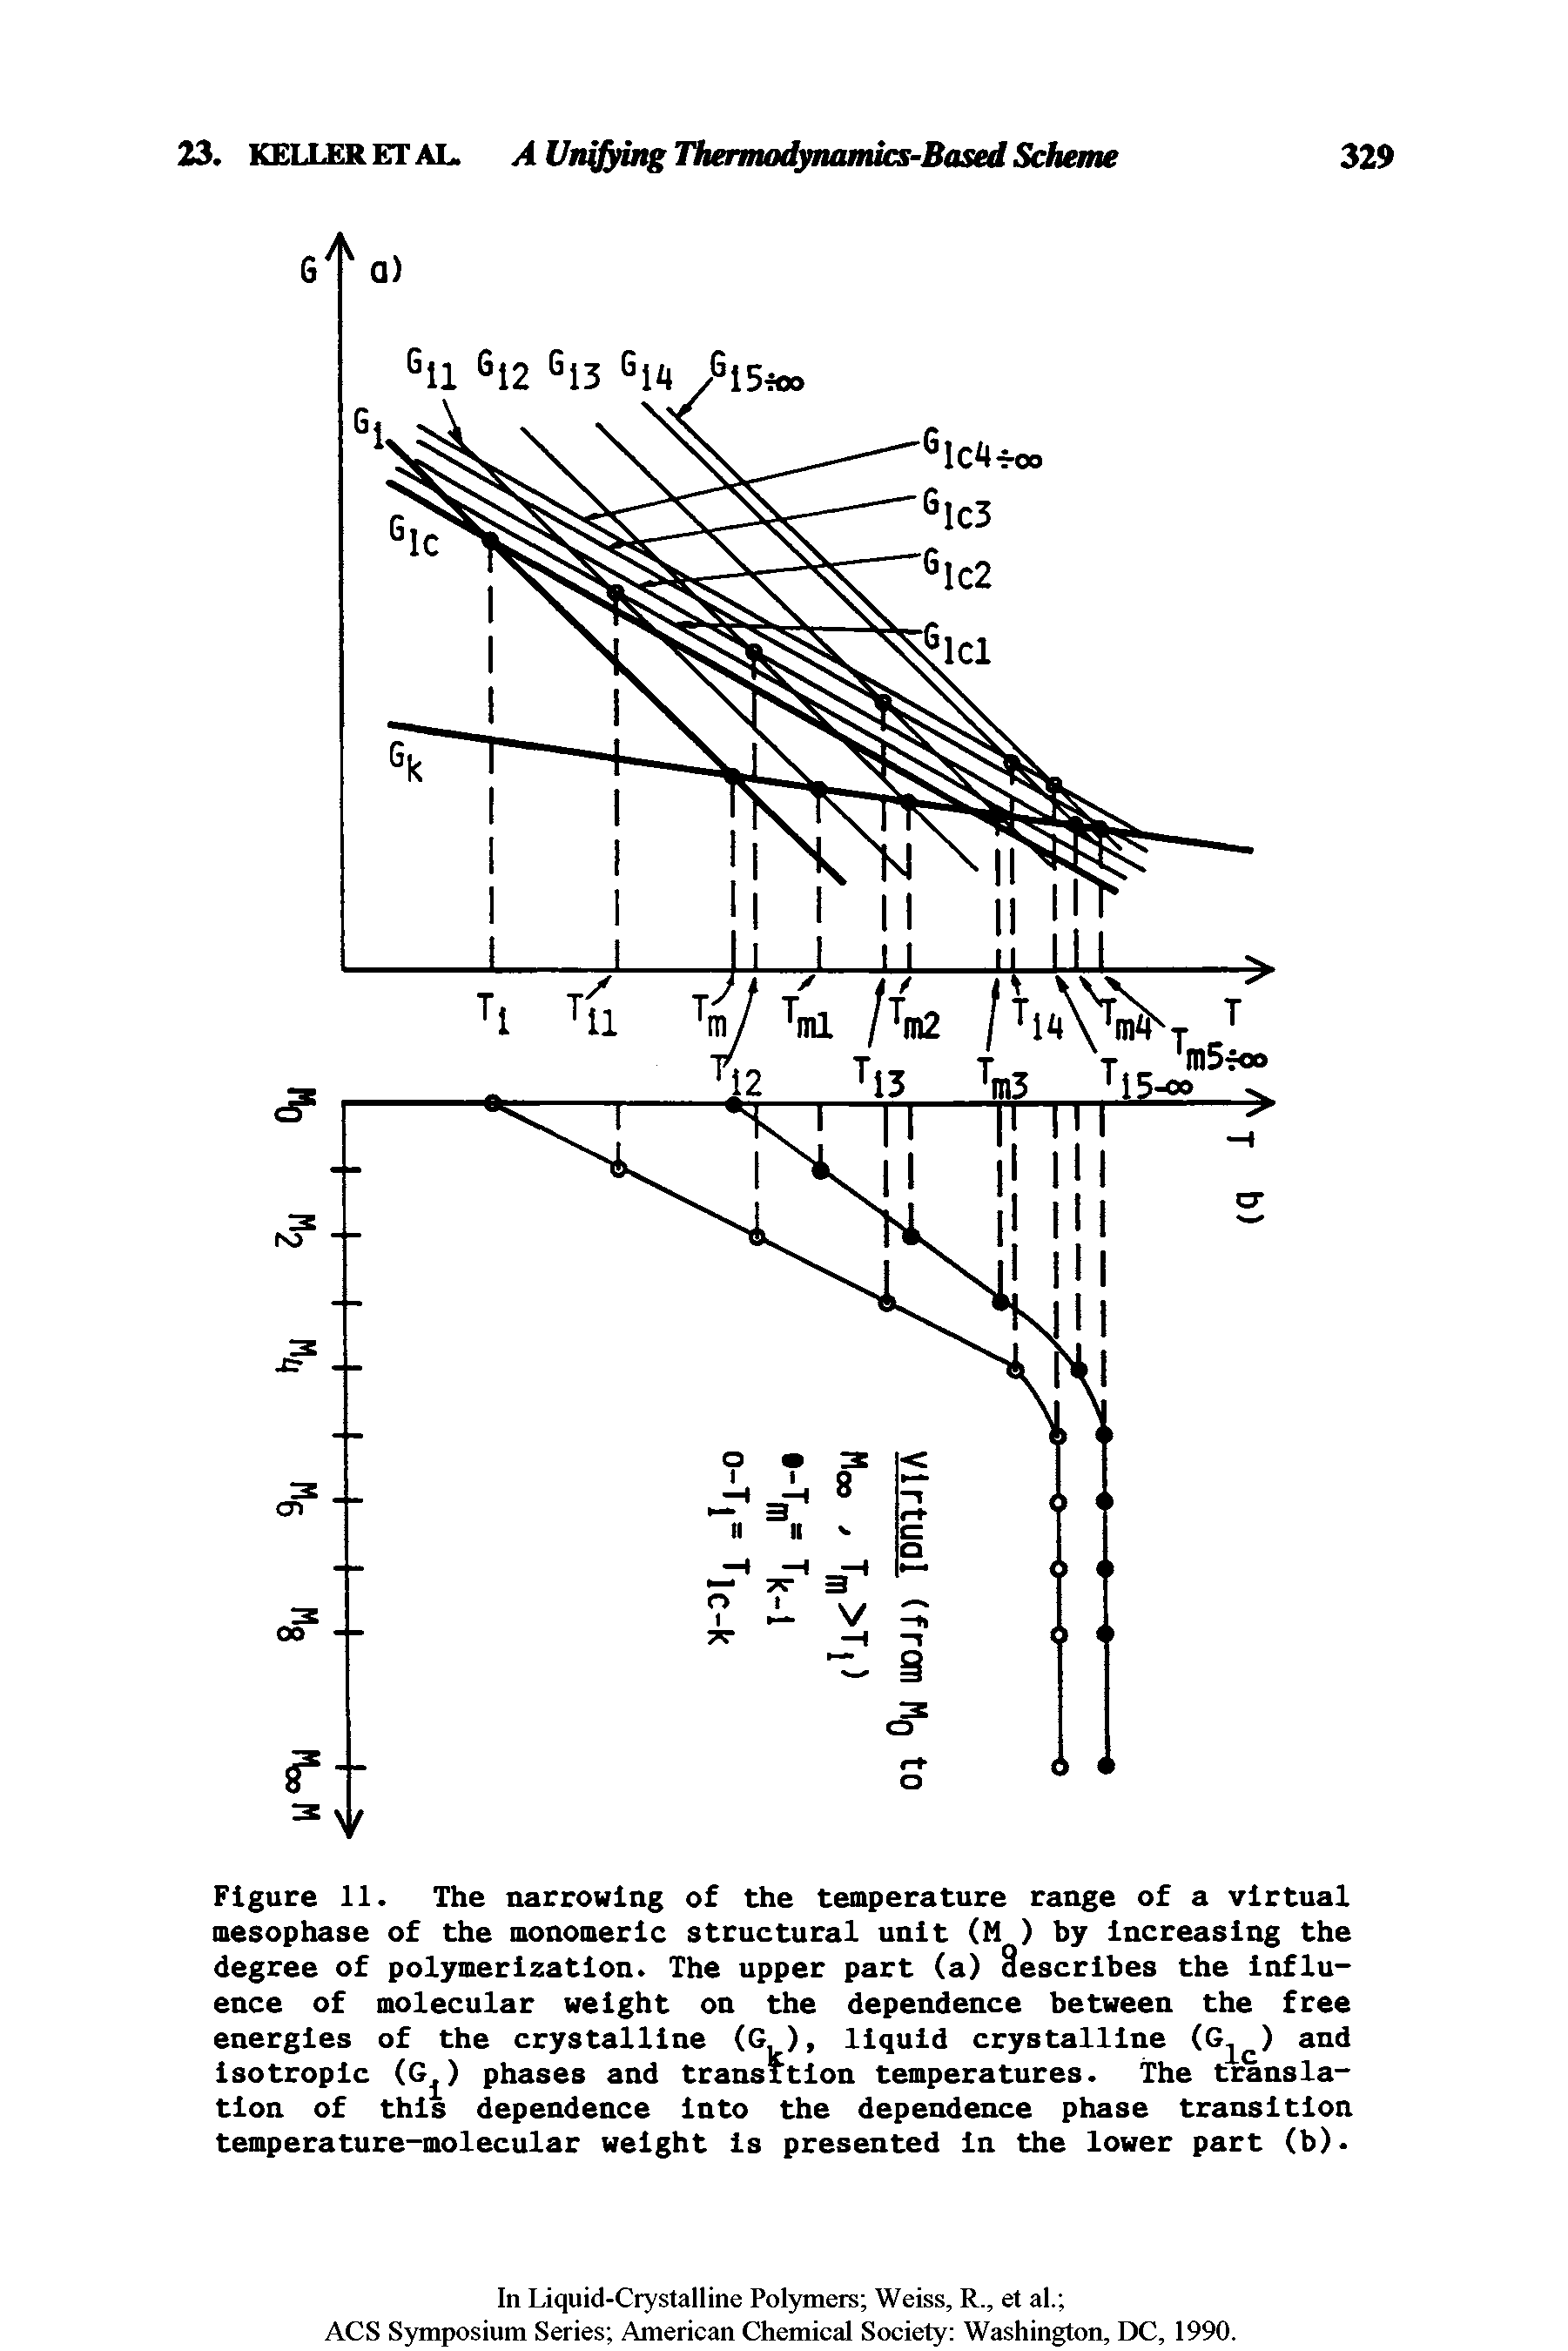 Figure 11. The narrowing of the temperature range of a virtual mesophase of the monomeric structural unit (M ) by Increasing the degree of polymerization. The upper part (a) describes the Influence of molecular weight on the dependence between the free energies of the crystalline (G ), liquid crystalline (Glc) and Isotropic (G ) phases and transition temperatures. The translation of this dependence Into the dependence phase transition temperature-molecular weight is presented In the lower part (b).